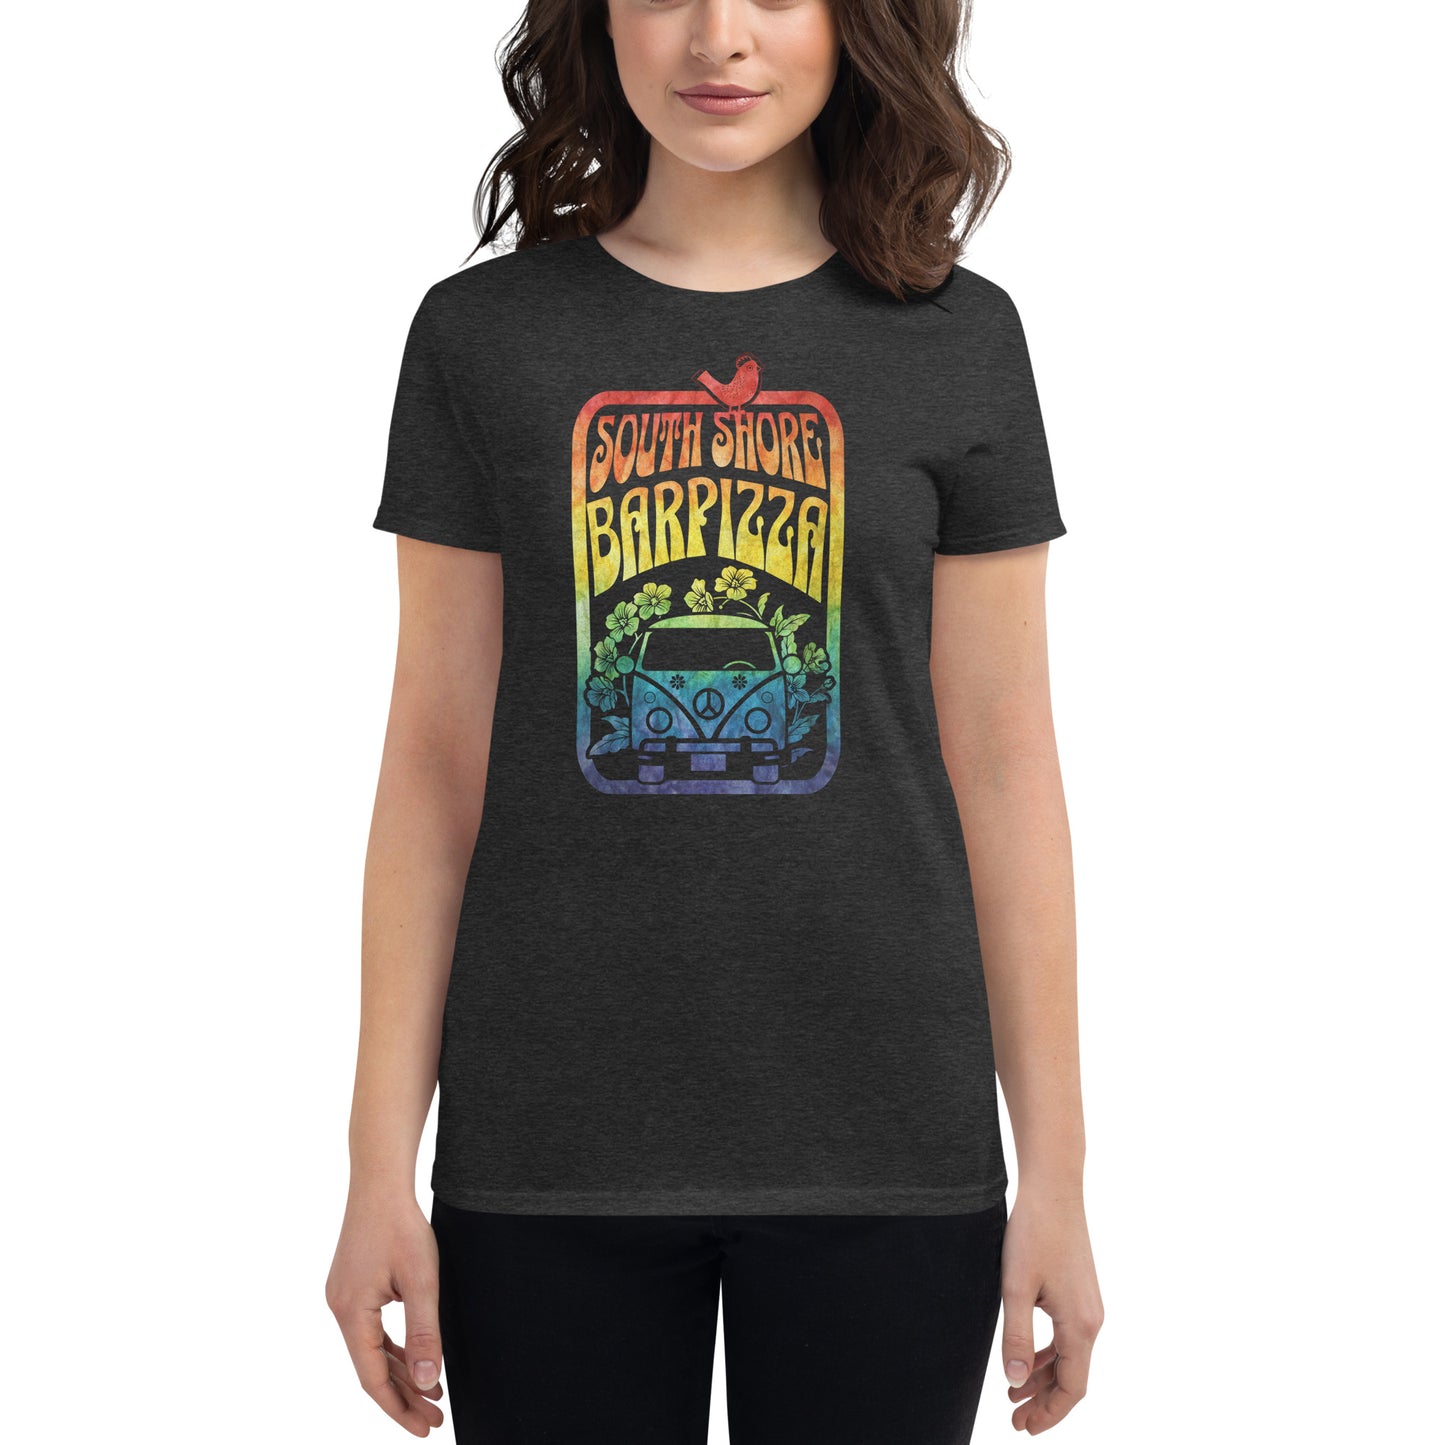 South Shore Bar Pizza - Fitted Women's Short Sleeve Woodstock Tee